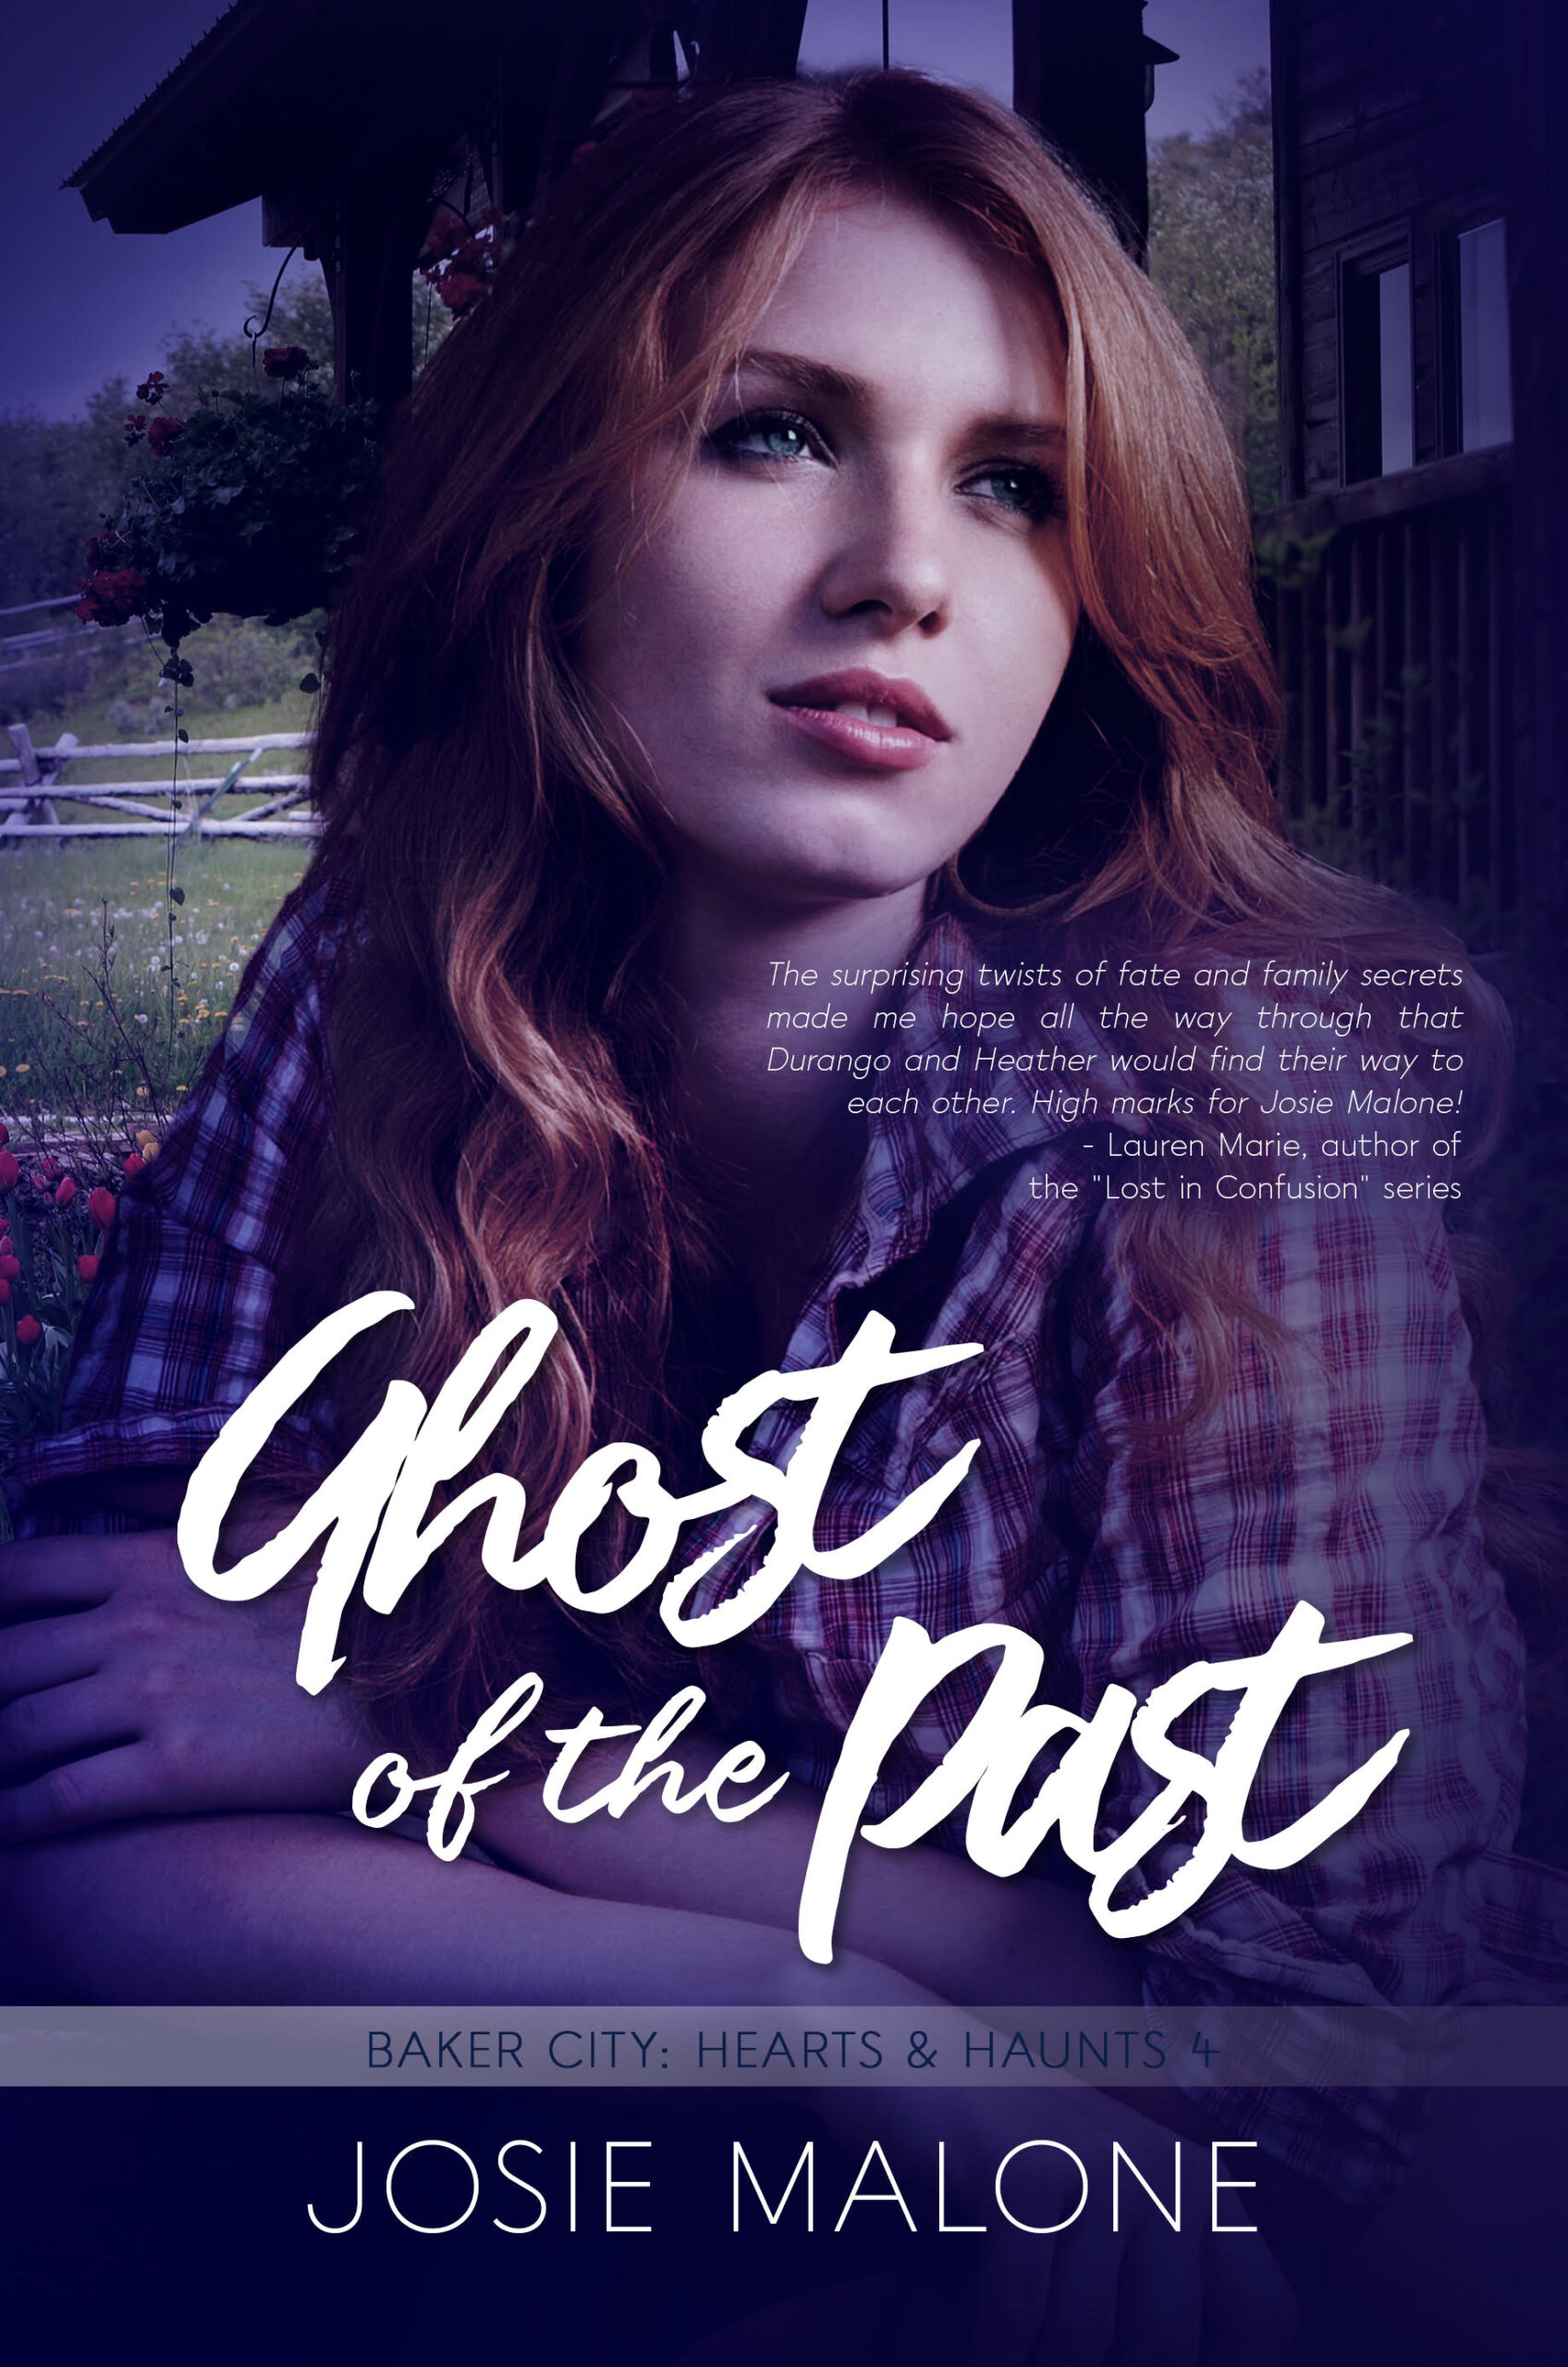 Ghost of the Past is Book 4 in the Baker City Hearts and Haunts series